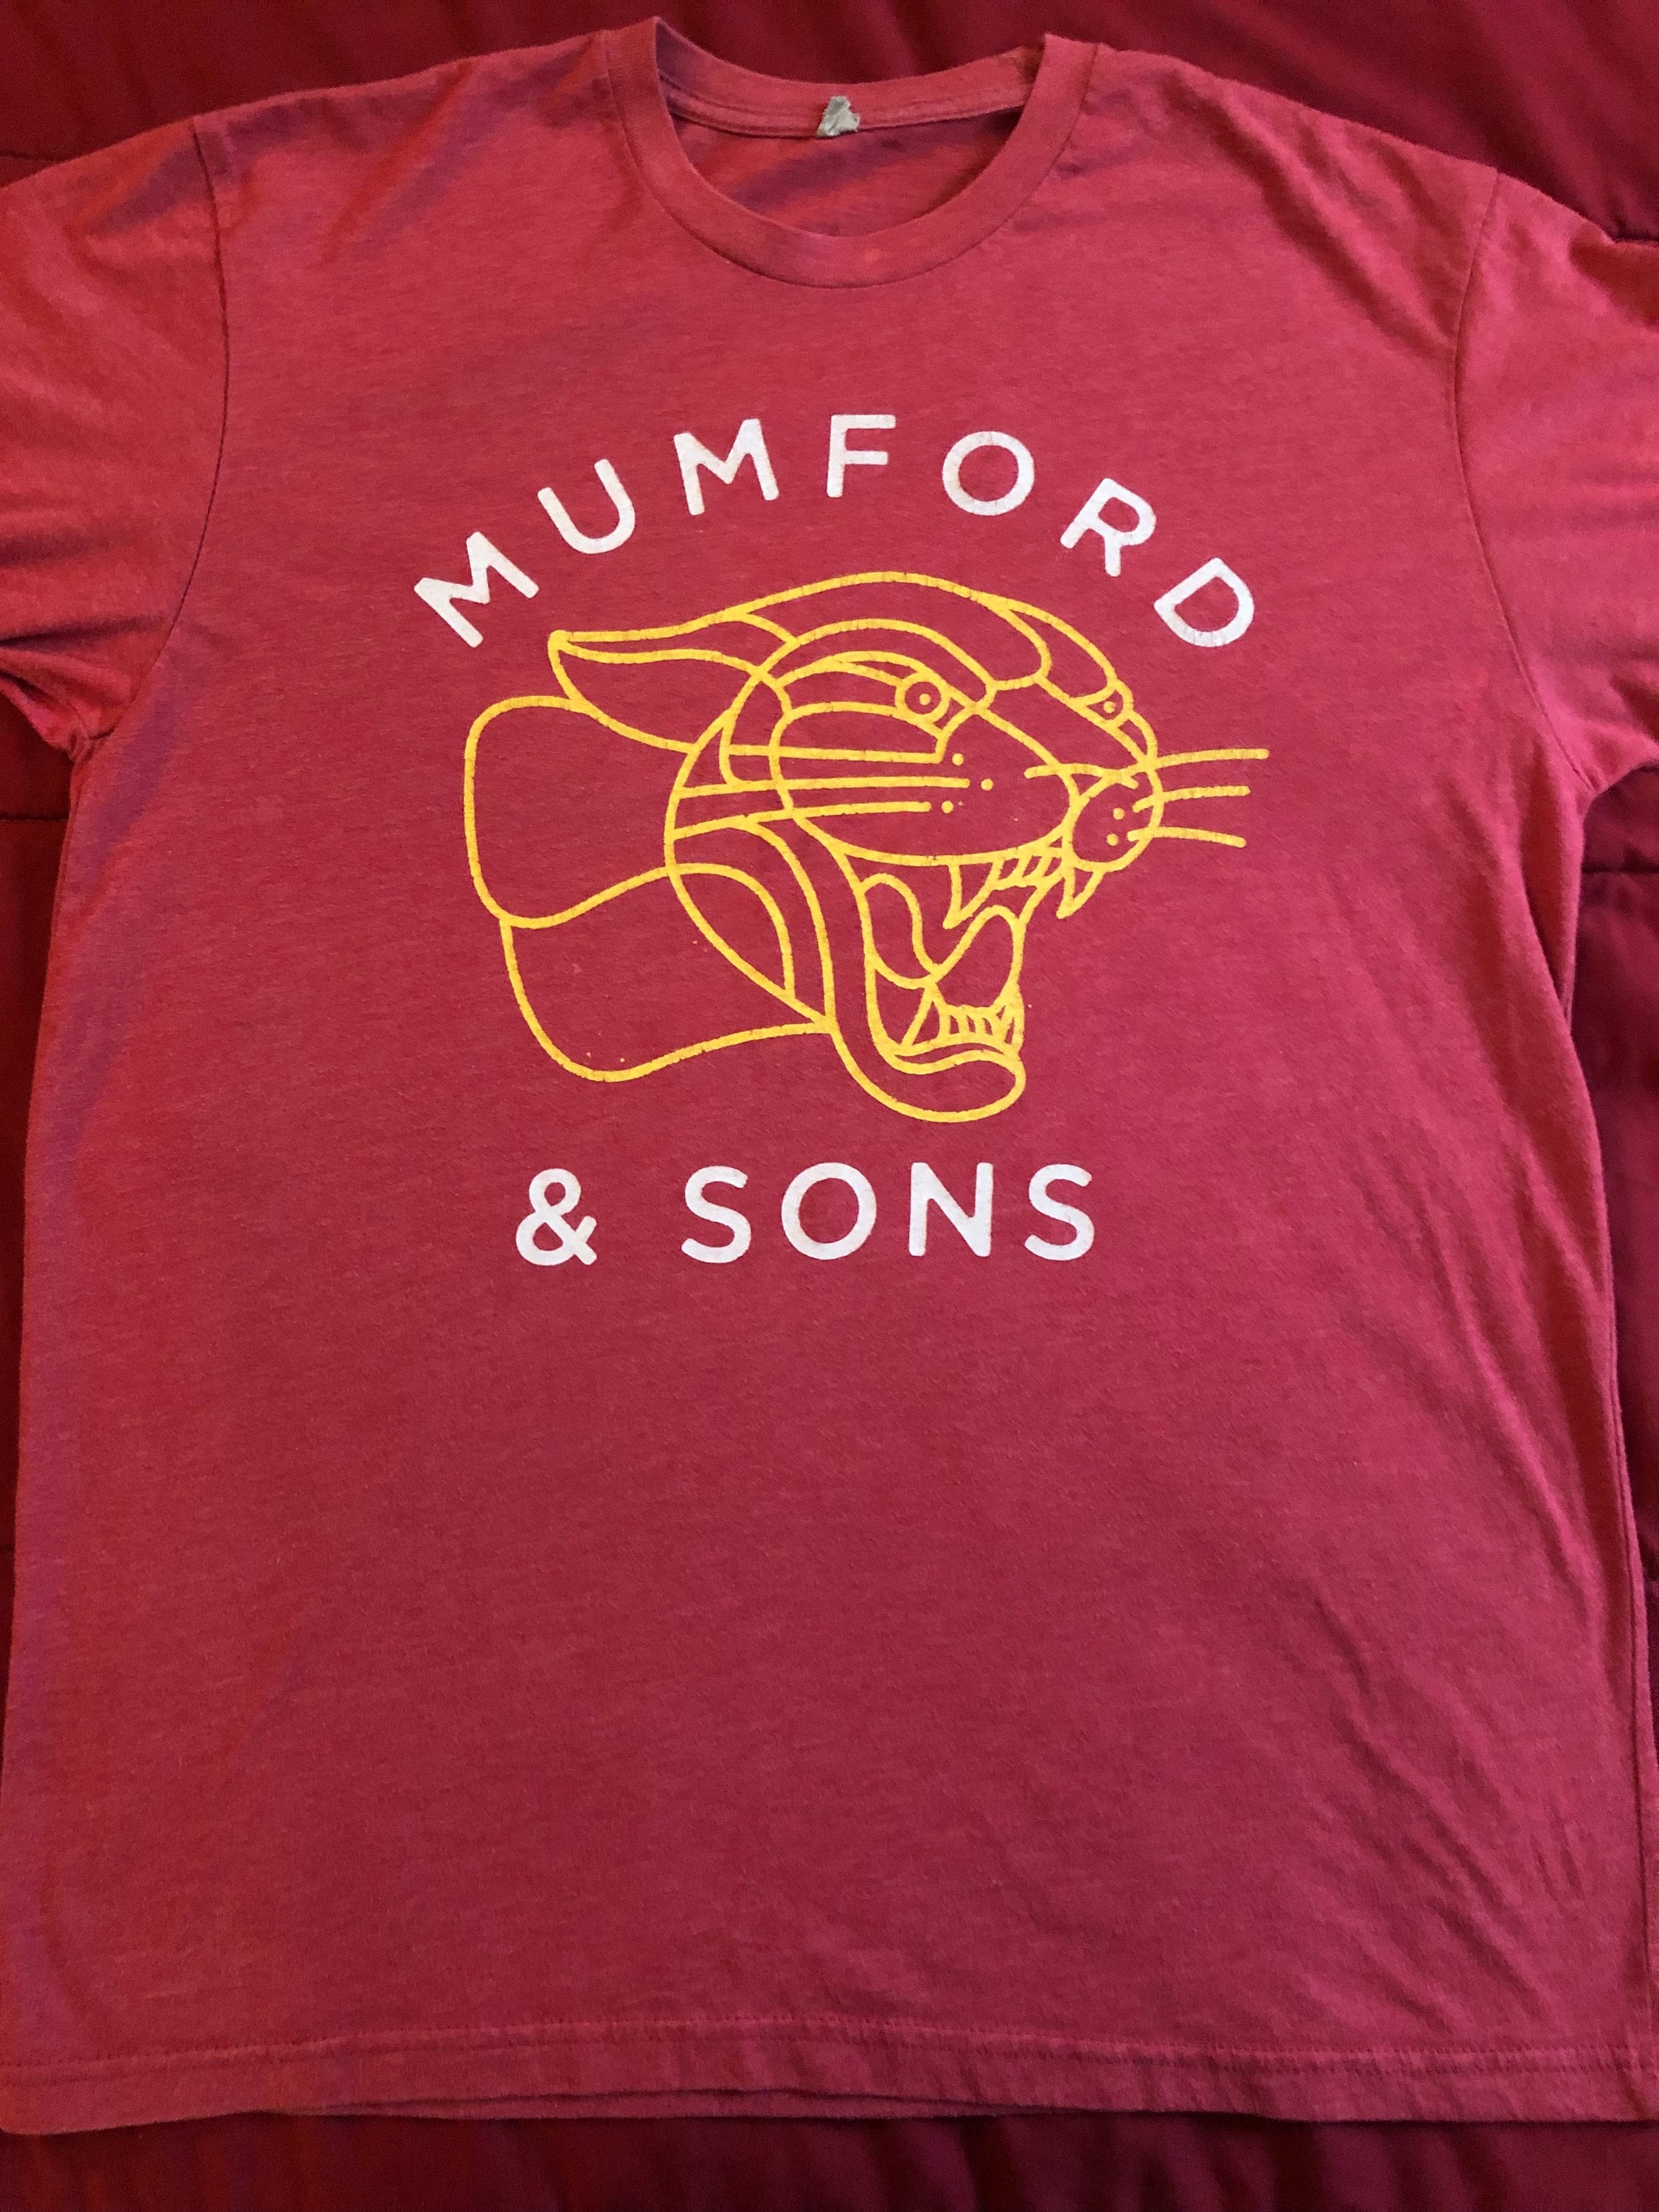 Mumford and Sons Indie Rock Band Concert Tour T Shirt - Etsy